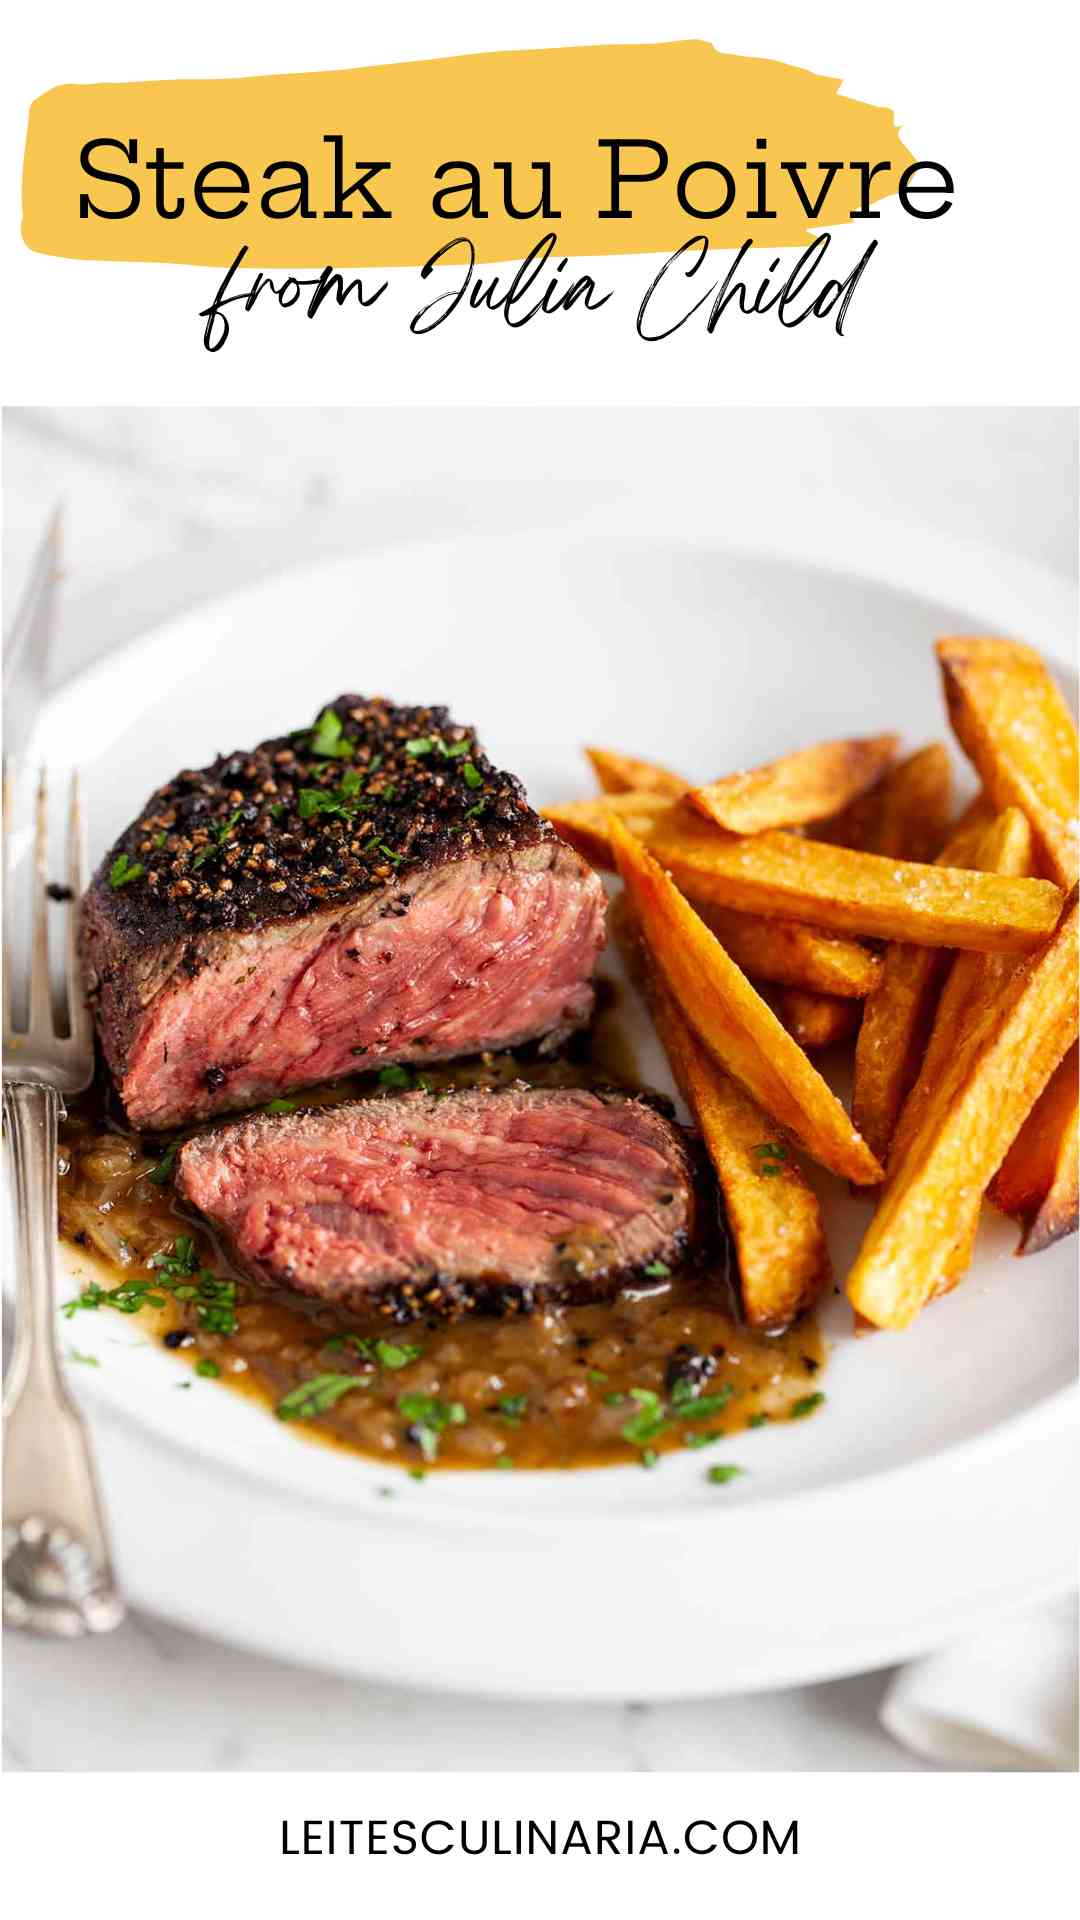 Partially sliced steak au poivre on a white plate with sweet potato fries.